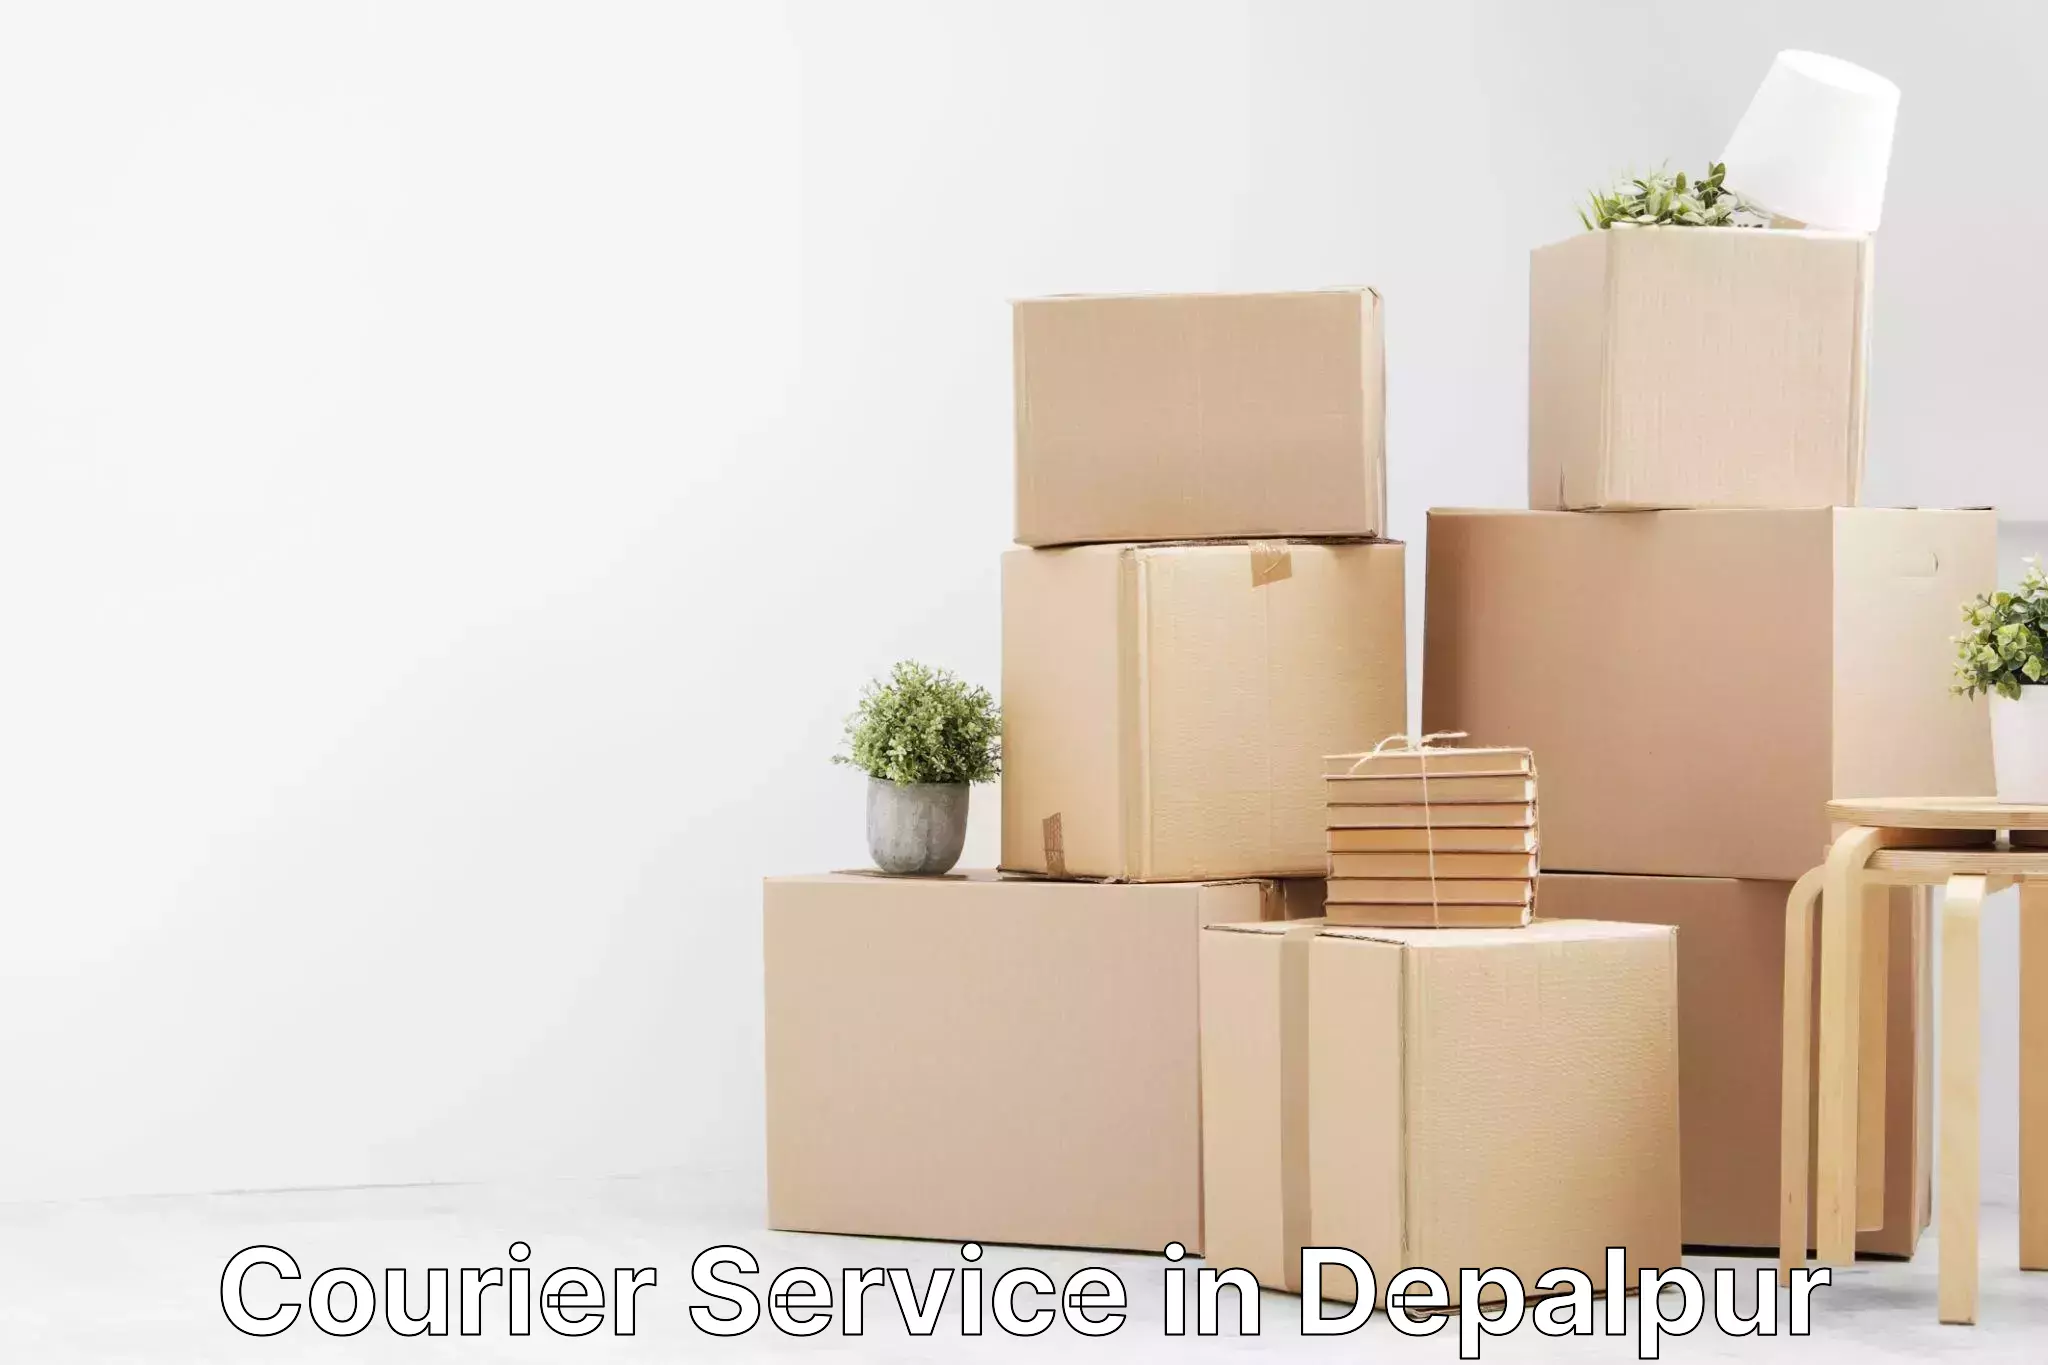 High-quality delivery services in Depalpur